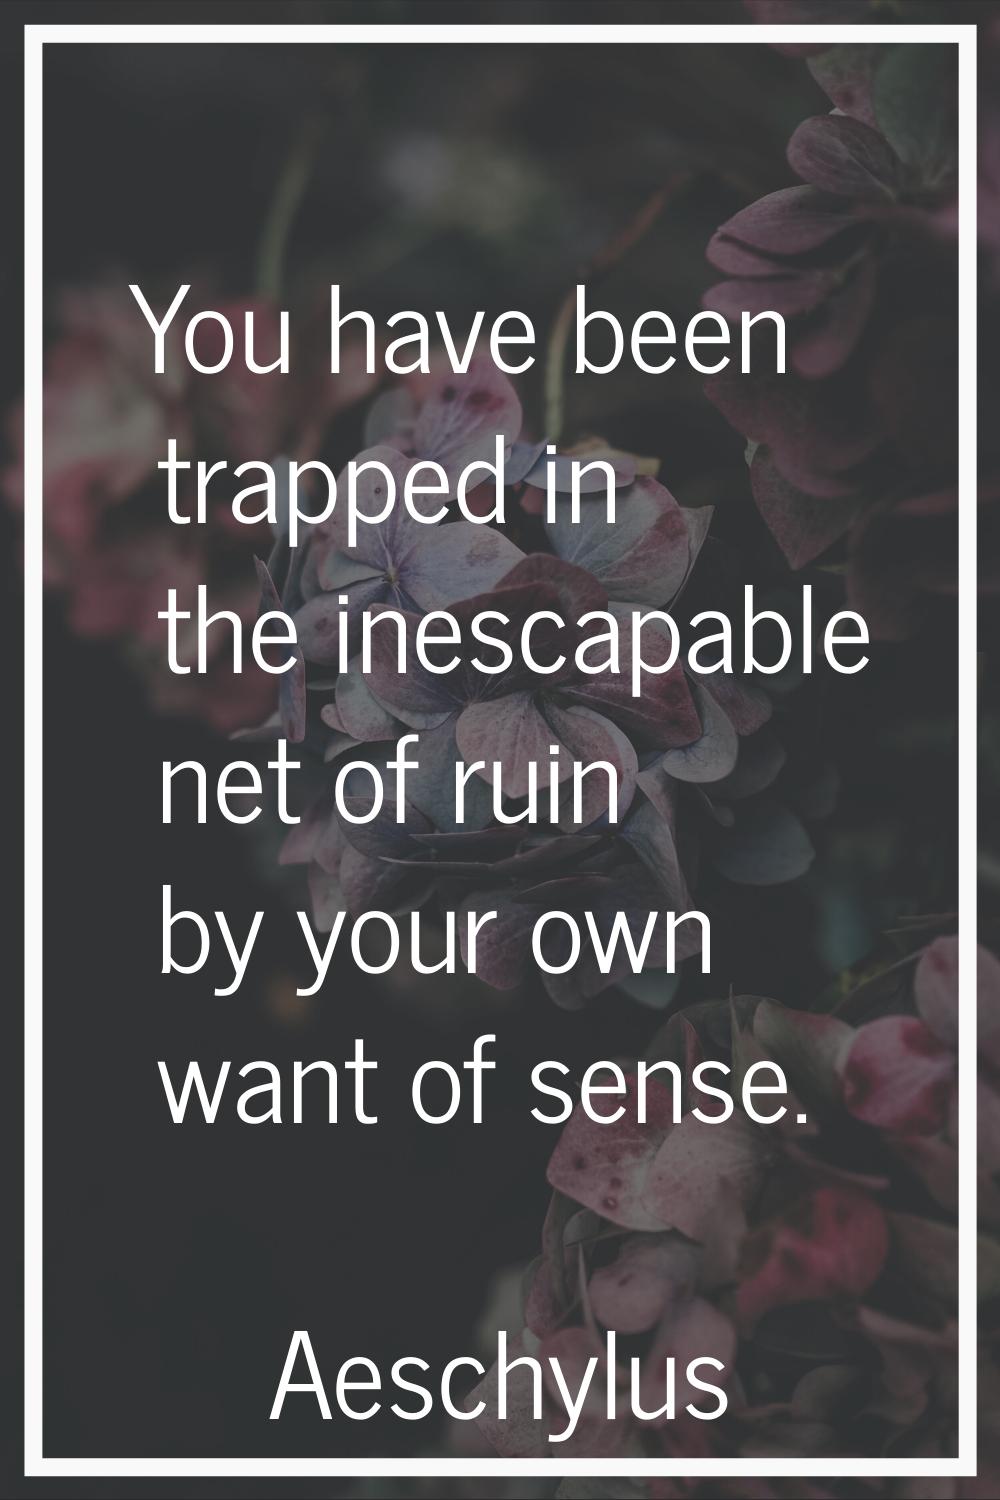 You have been trapped in the inescapable net of ruin by your own want of sense.